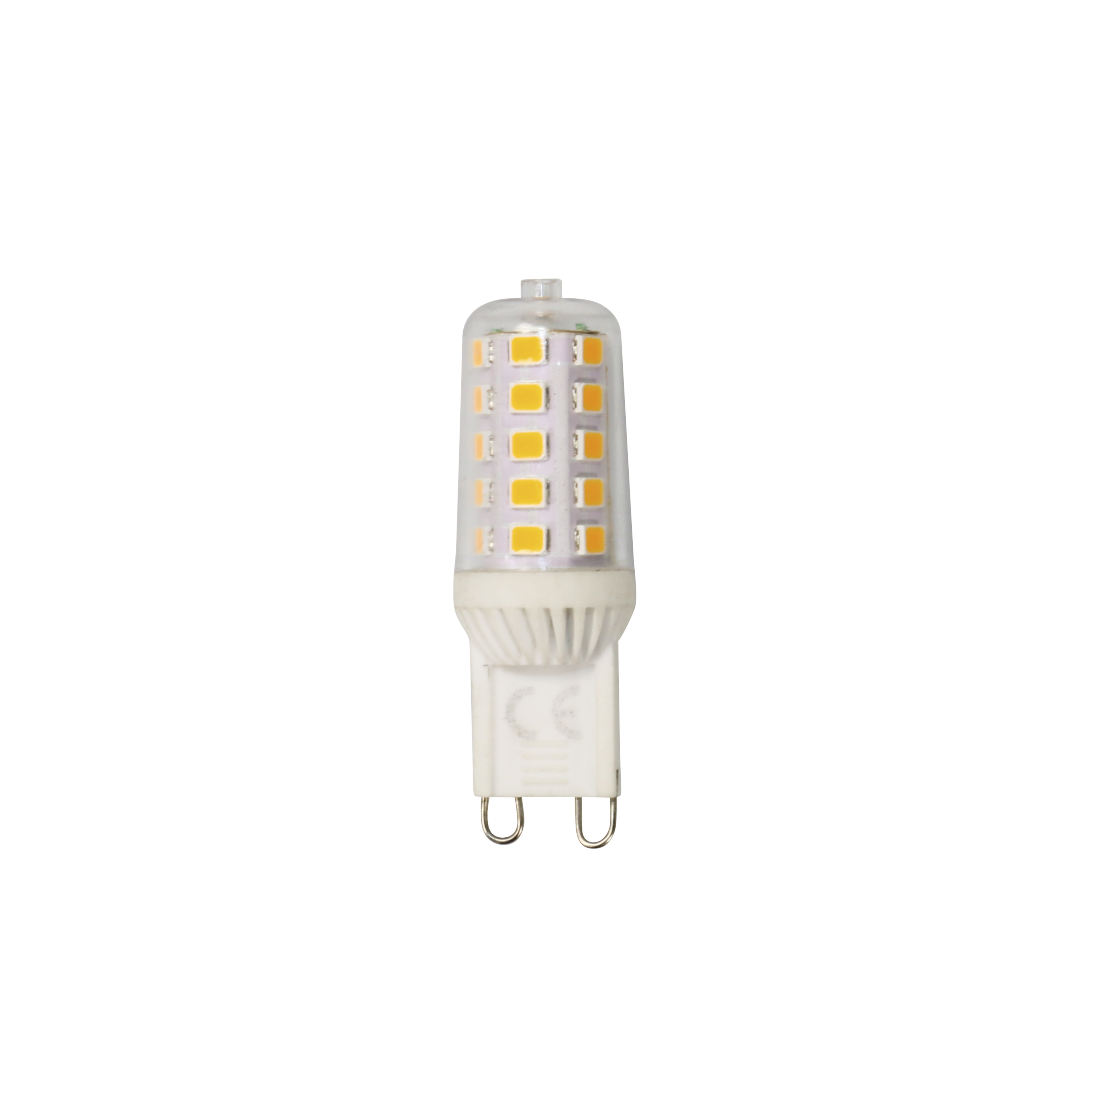 abx High-Res Image - Xavax, LED Bulb, G9, 300 lm, Replaces 28 W, Capsule, Dimmable, warm white